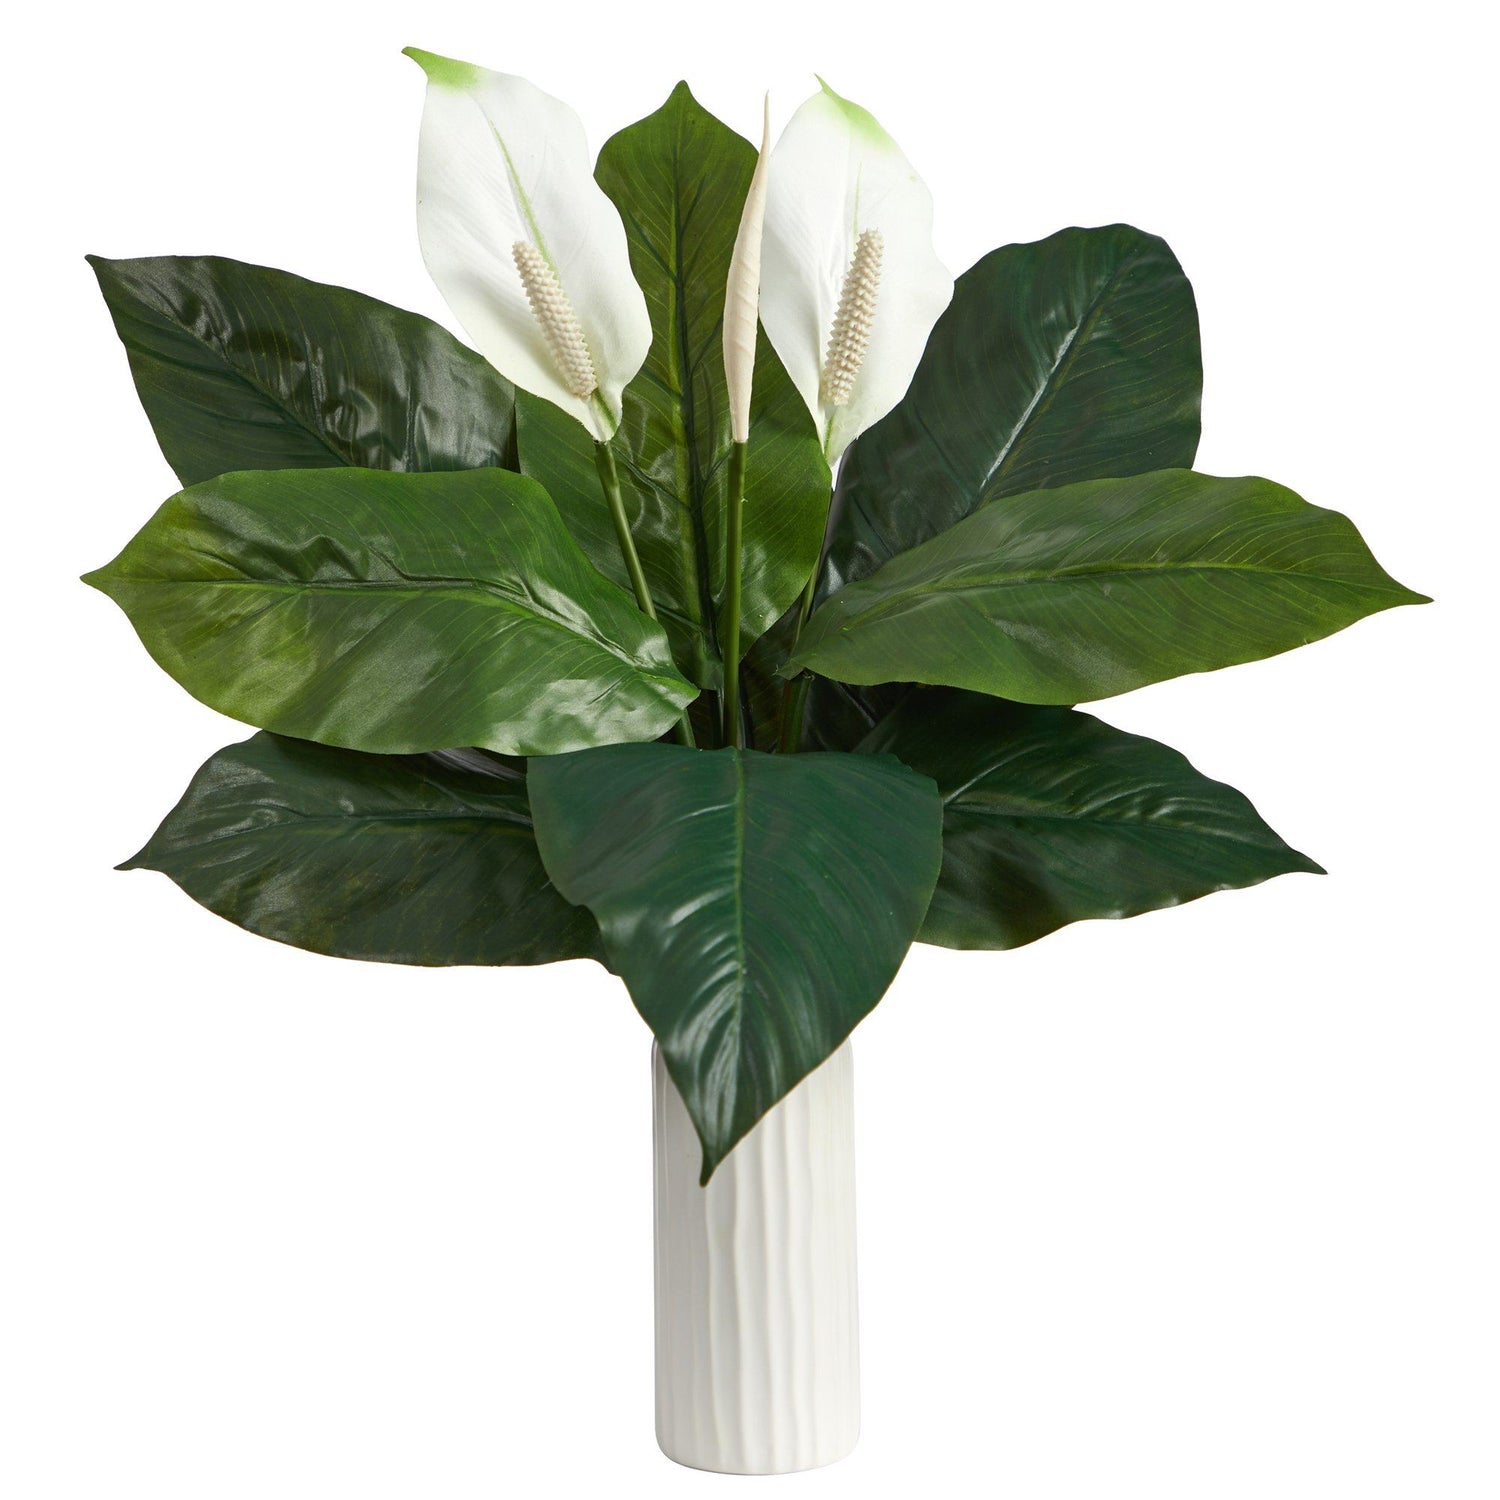 23” Mixed Spathiphyllum Artificial Plant in White Planter